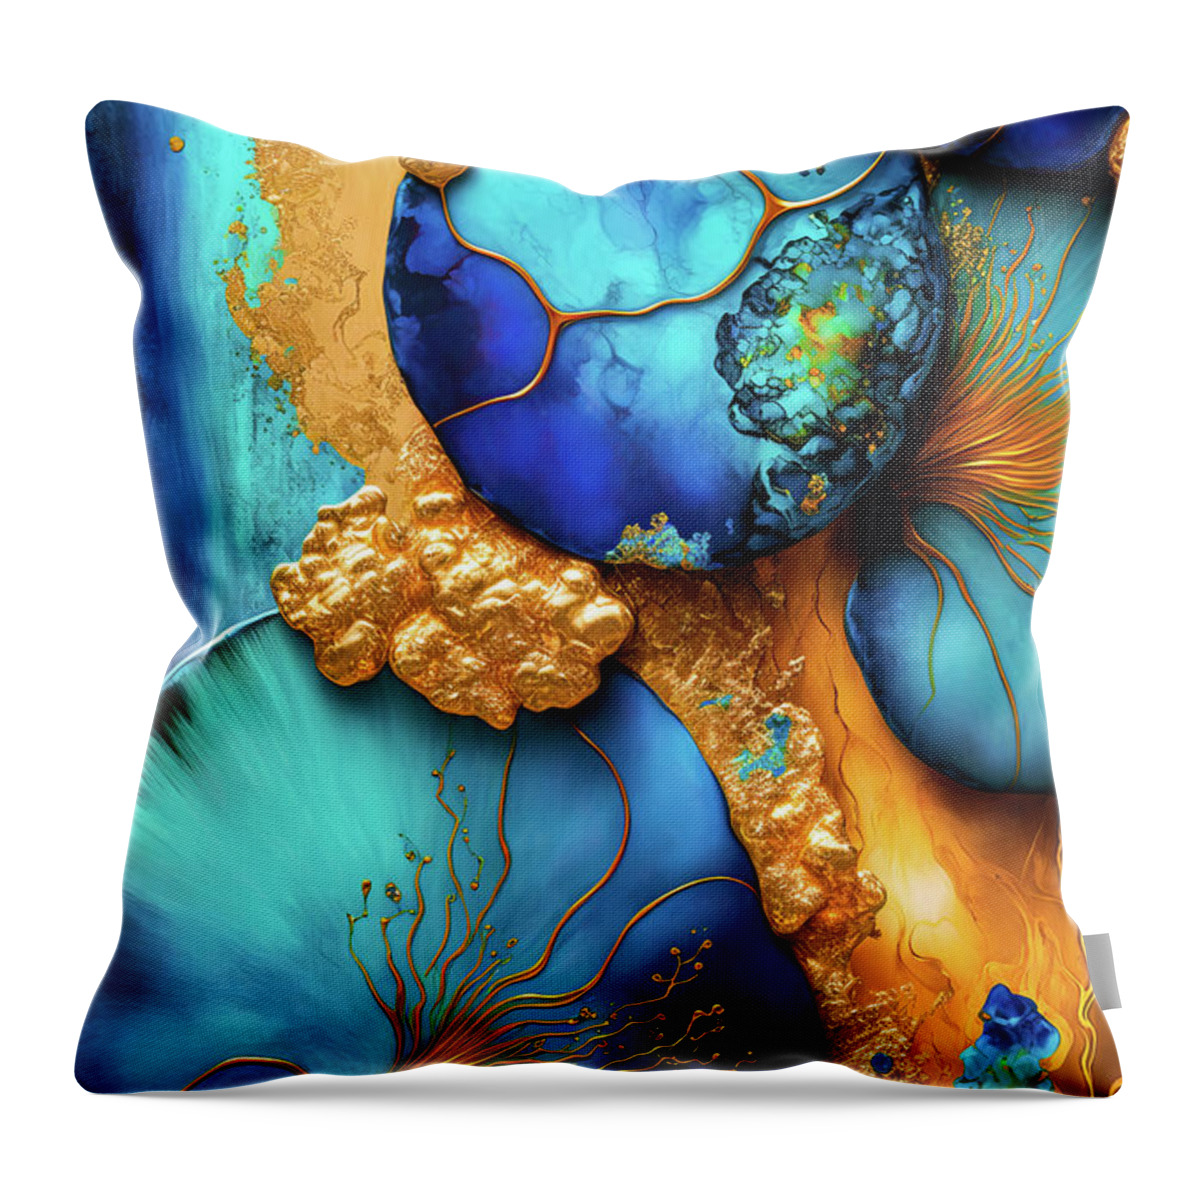 Abstract Throw Pillow featuring the digital art Abstract Art Alcohol Ink Style 03 Blue and Gold by Matthias Hauser